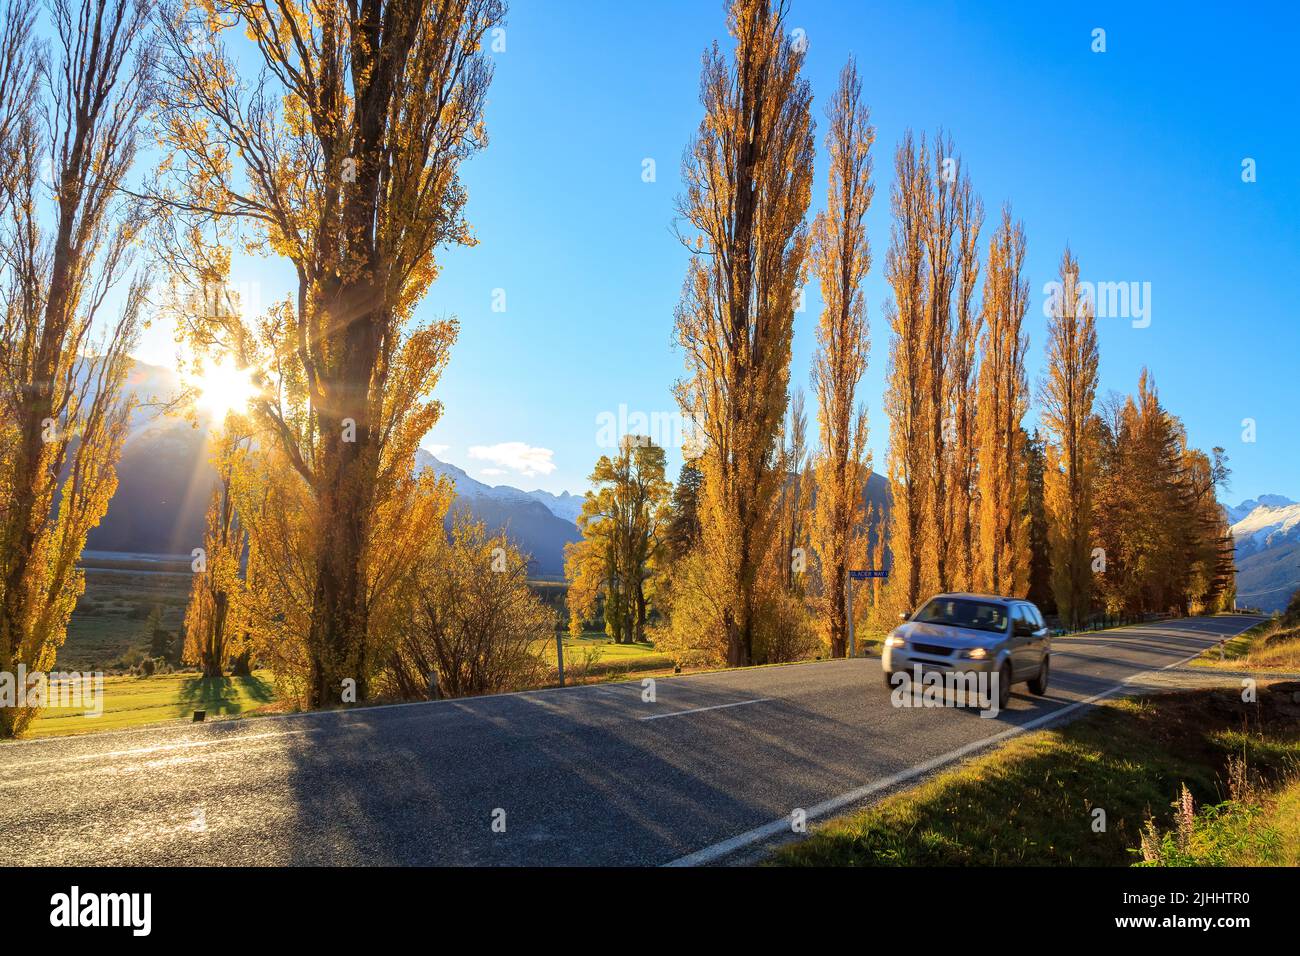 A row of autumn poplar trees beside a rural road north of Glenorchy in the Otago region, New Zealand Stock Photo